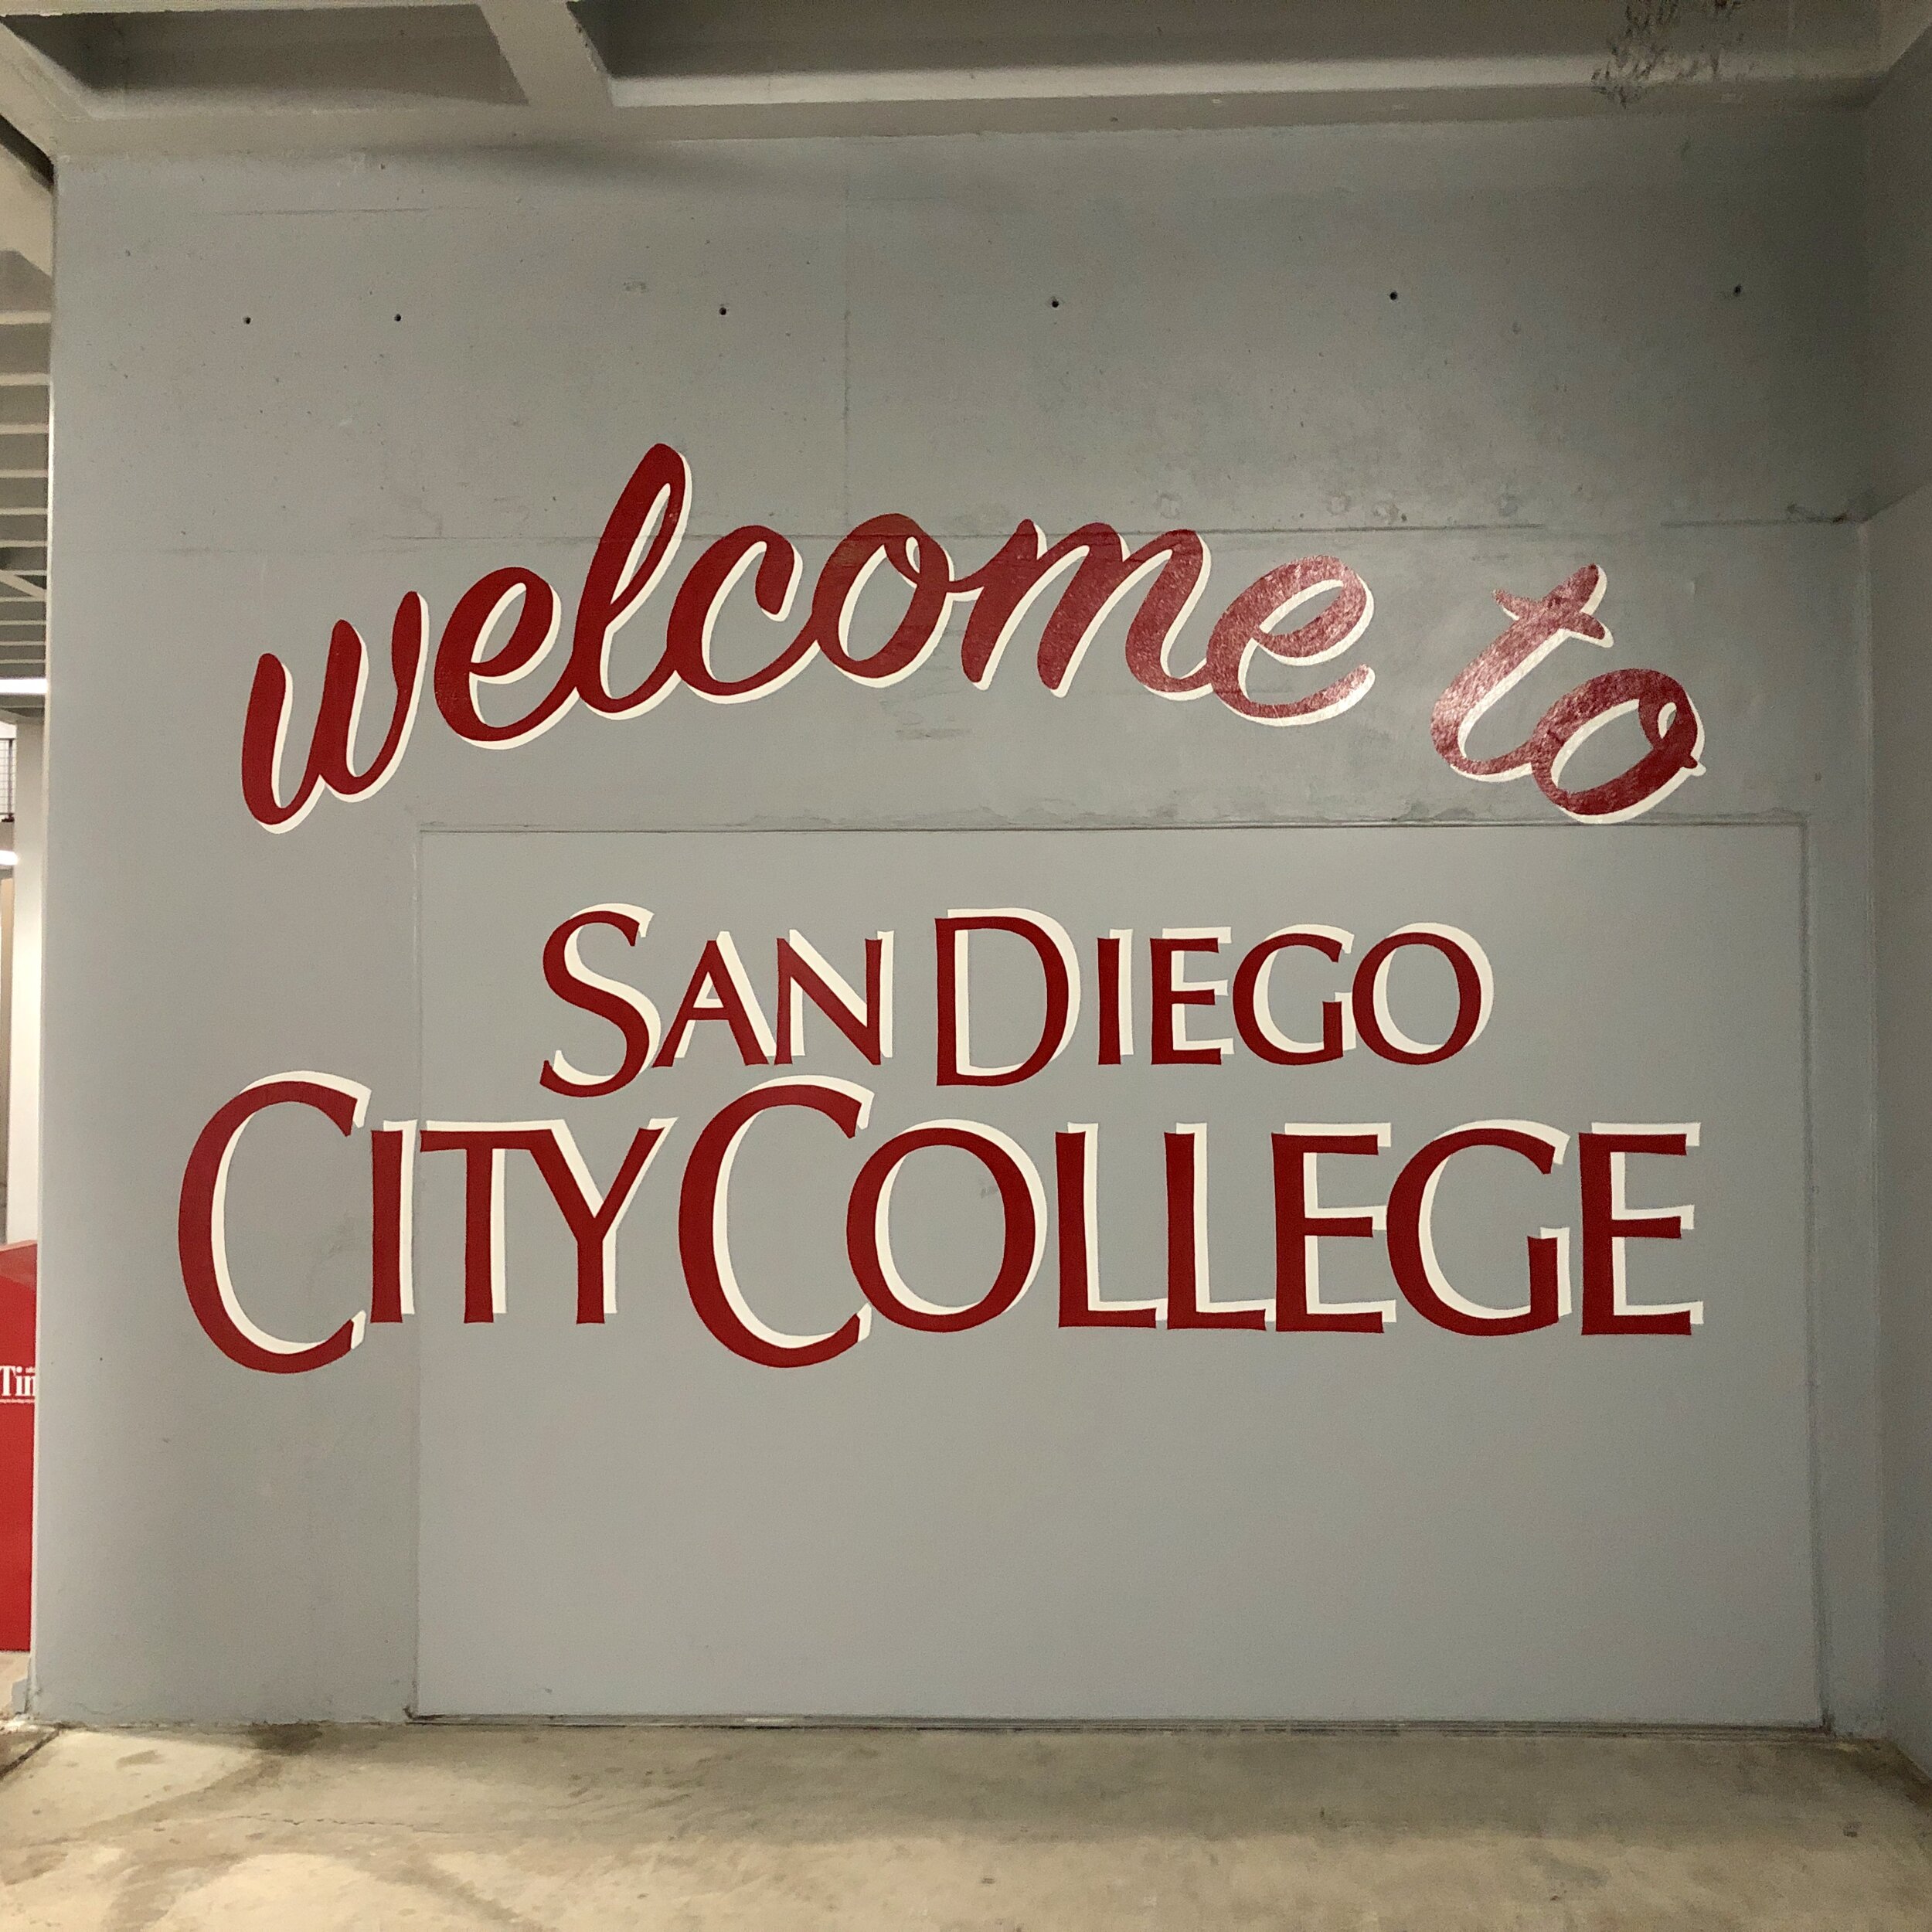 San Diego City College hand painted graphics